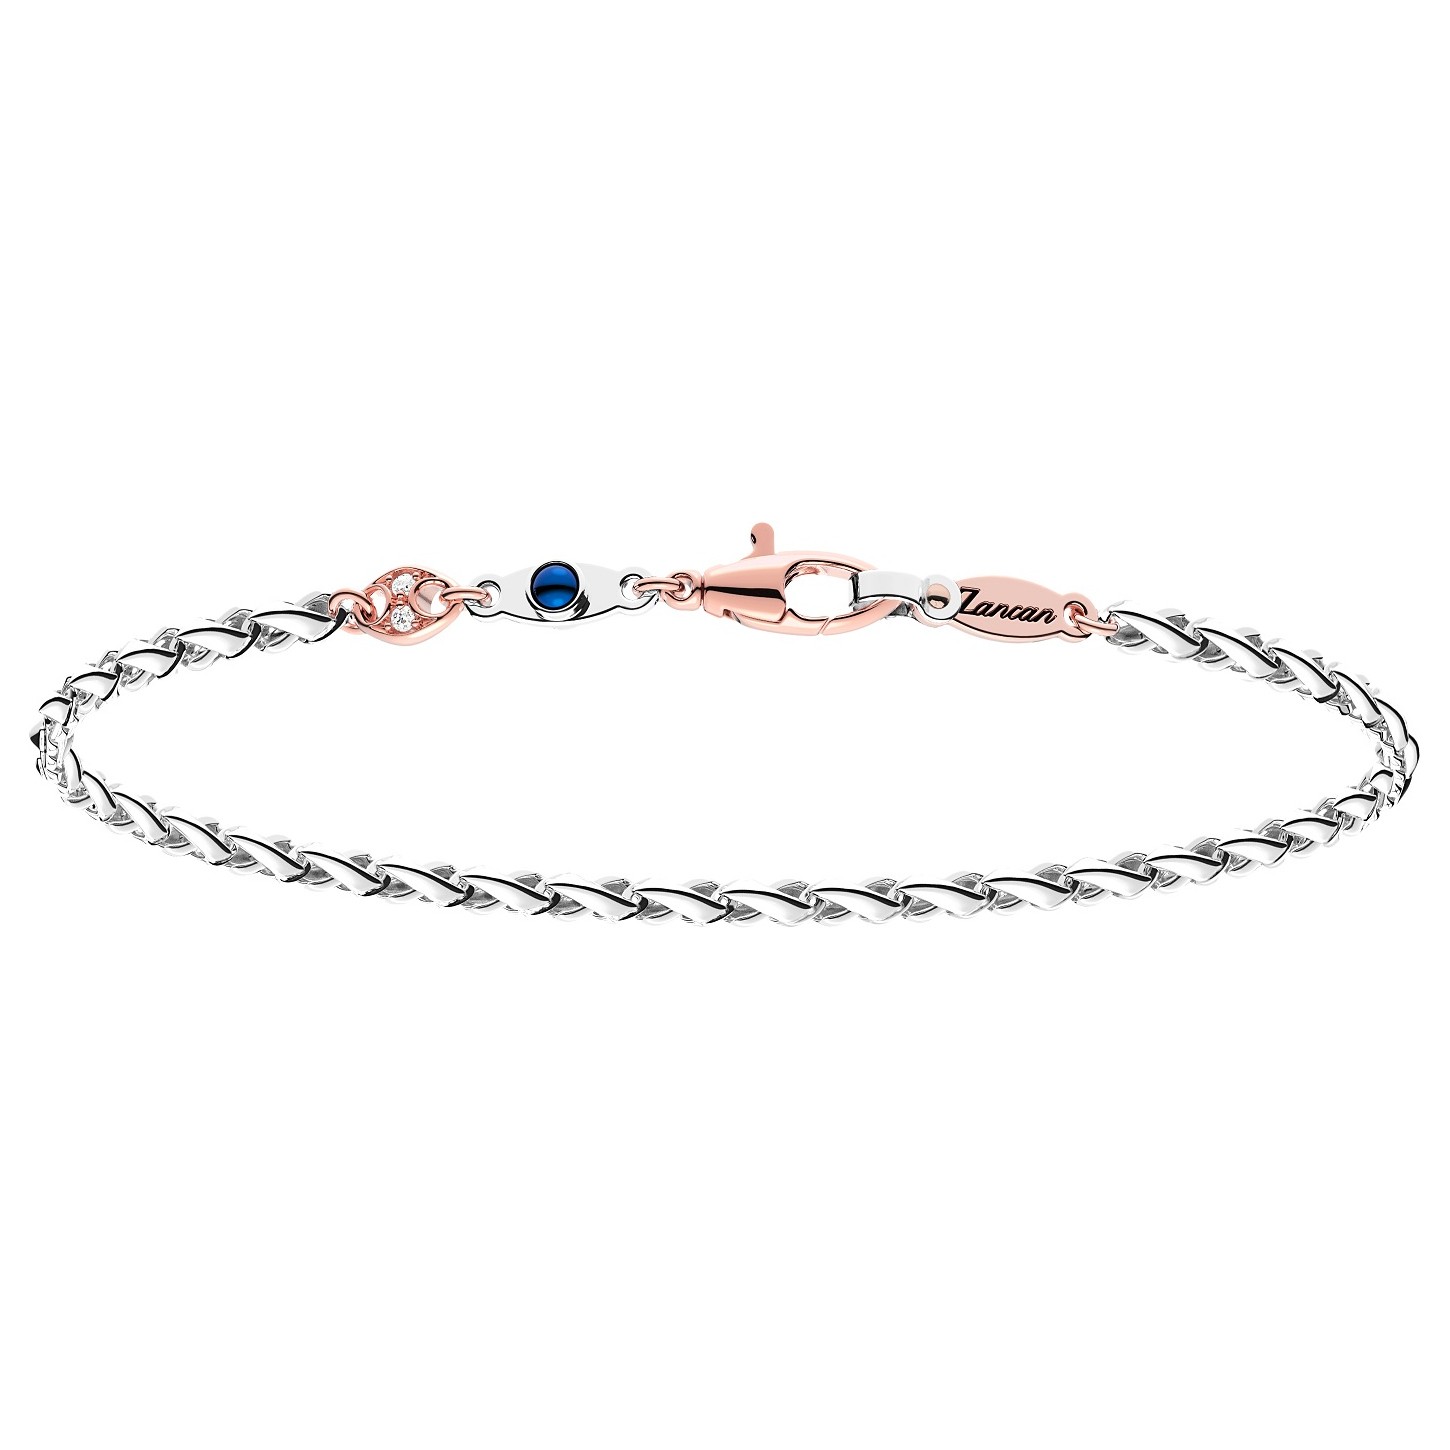 Zancan Insignia Men's Bracelet in Two-Tone Gold with Blue Sapphire and Diamonds